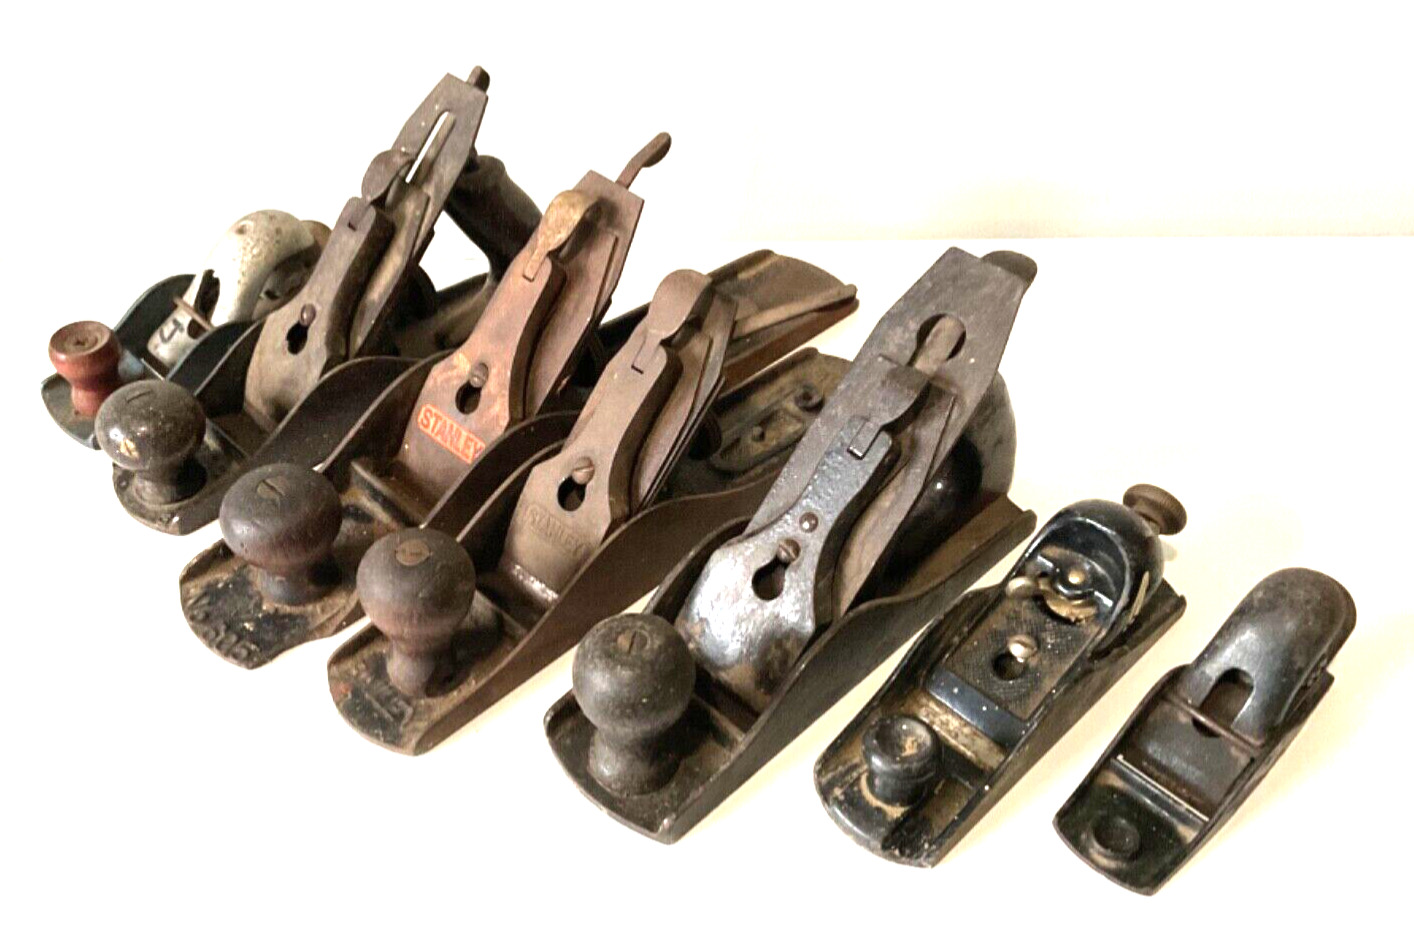 LOT OF 7 vintage wood plane STANLEY BAILEY OTHERS #3 #605 #5 1/4 MISSING PARTS